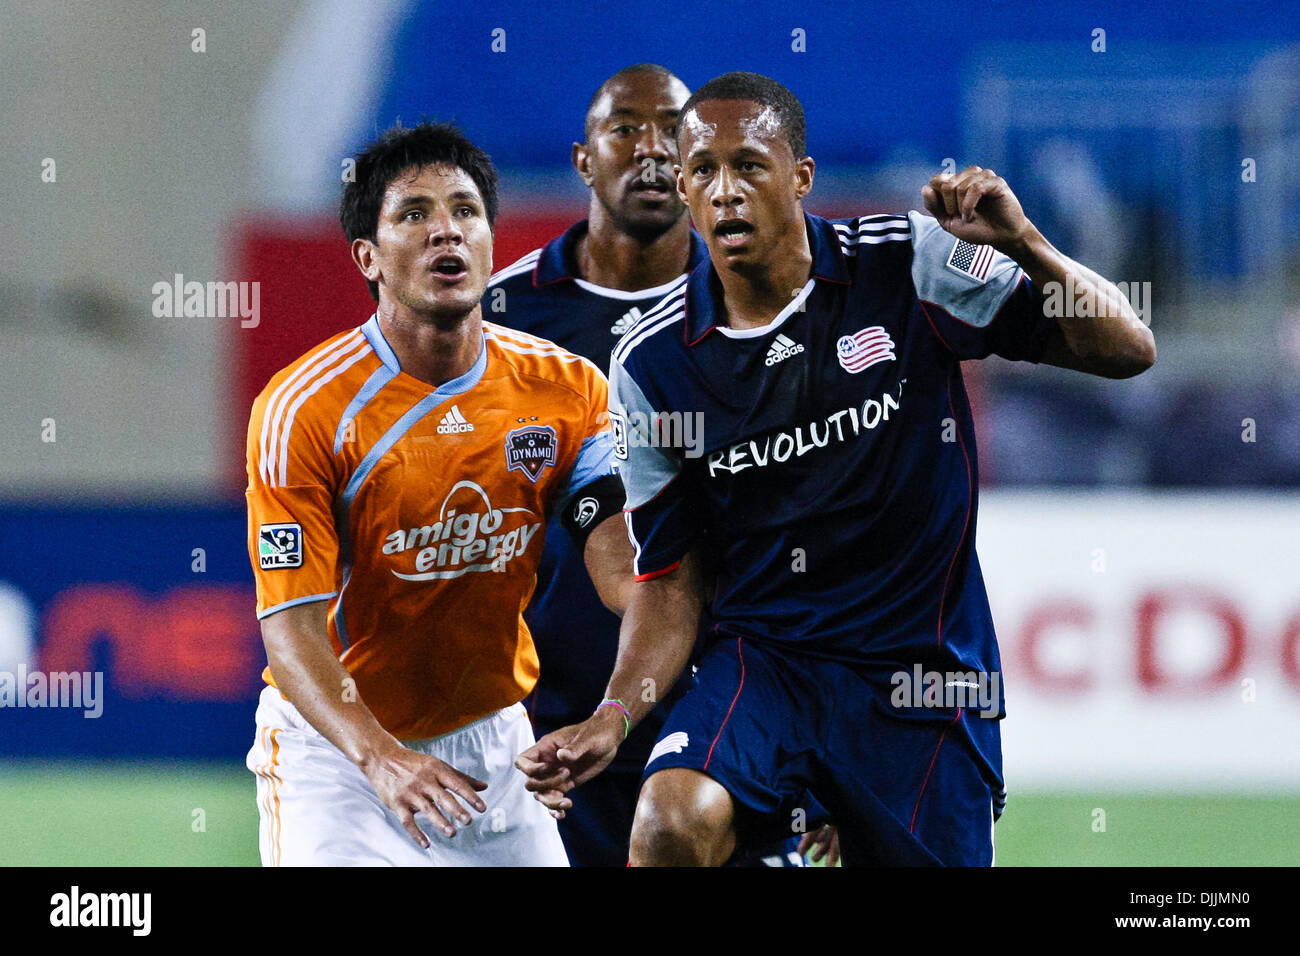 Aug. 14, 2010 - Foxboro, Massachusetts, United States of America - 14  August, 2010:  New England Revolution Midfielder Khano Smith (18) and Houston Dynamo Forward Brian Ching  (25) fight for position before a corner kick during match play at  Gillette Stadium in Foxboro, Massachusetts.  The New England Revolution defeated the Houston Dynamo 1-0..Mandatory Credit: Mark Box / Southc Stock Photo